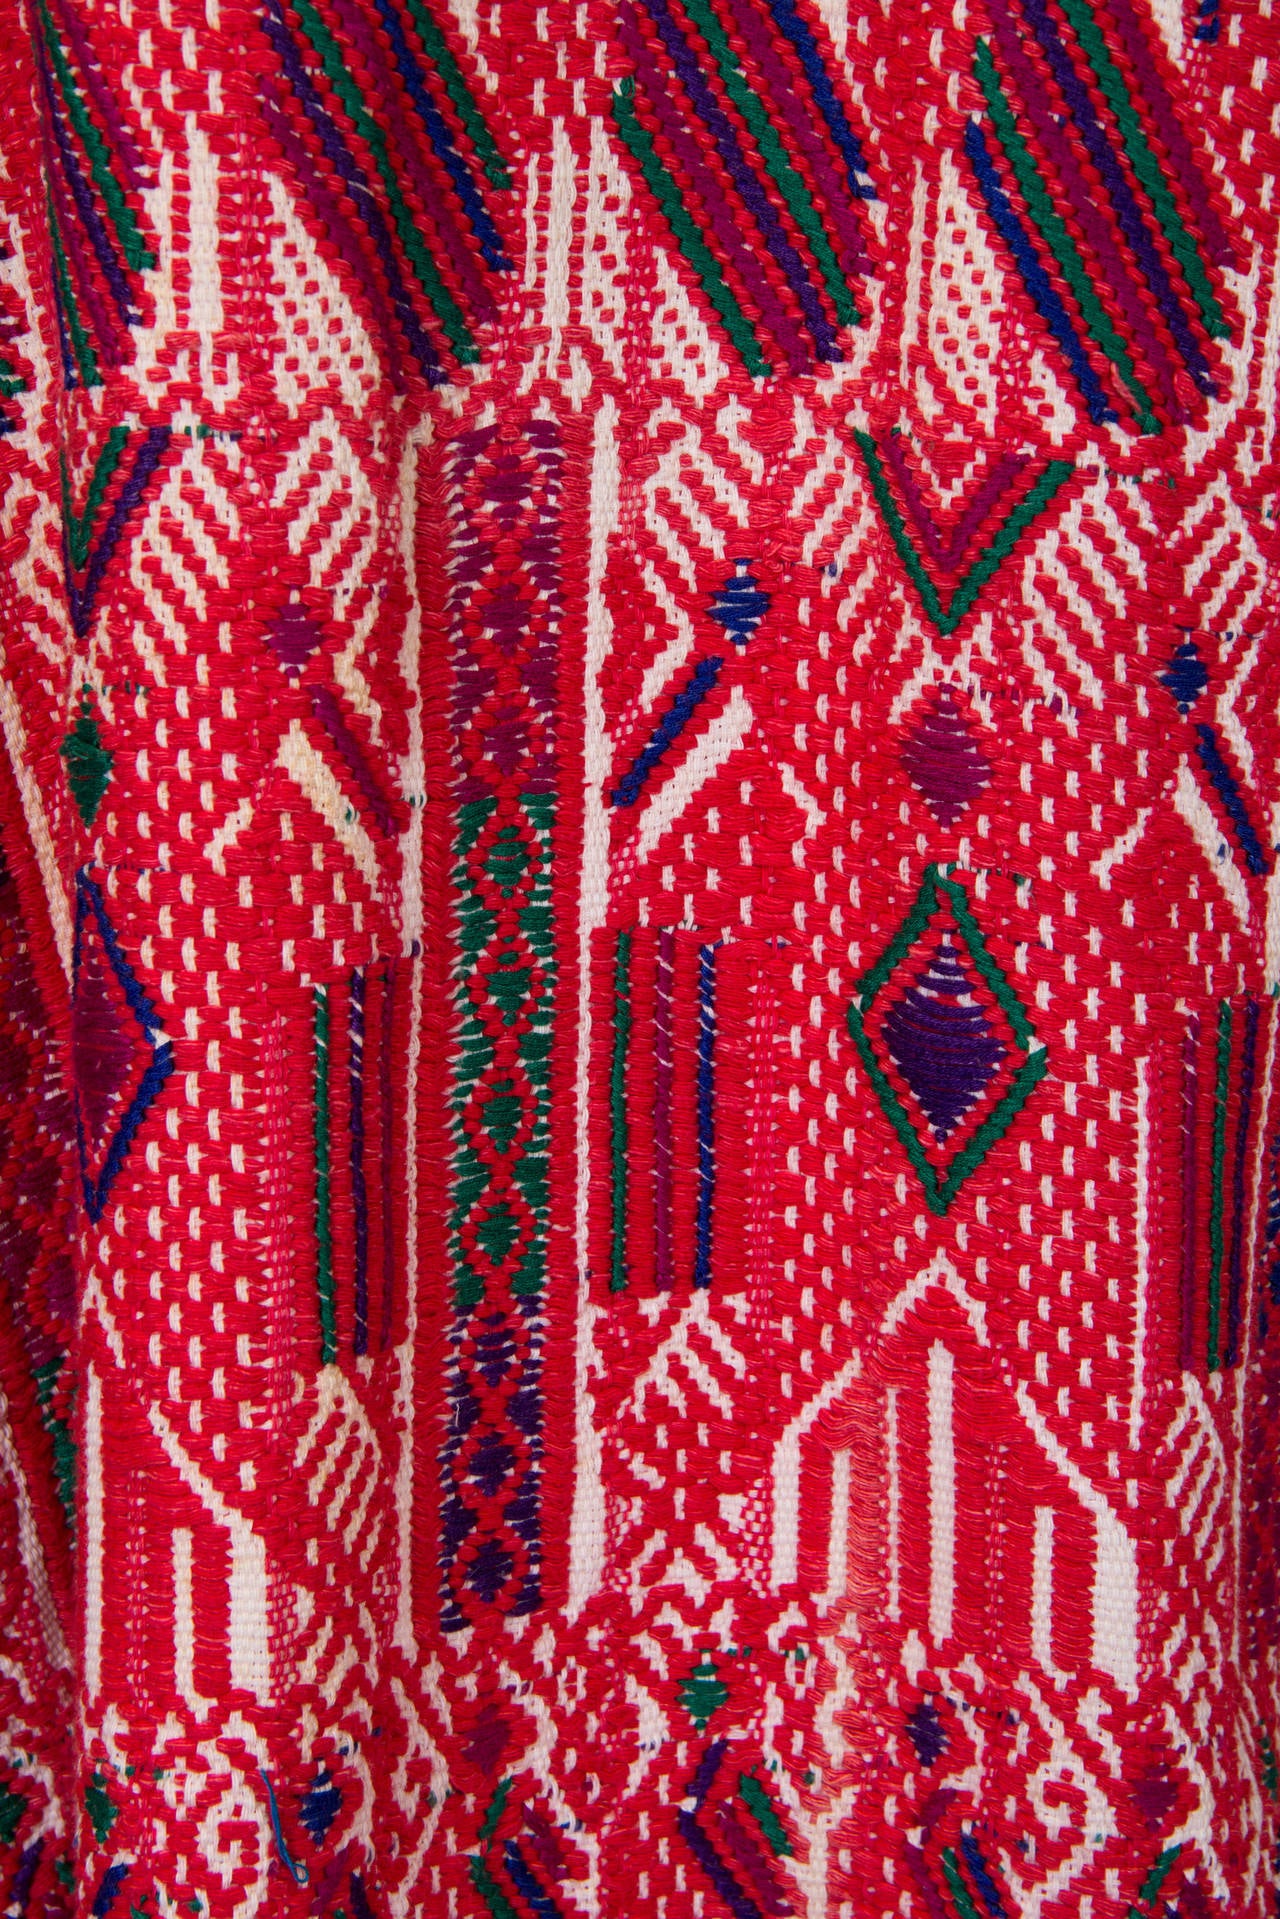 South American Ethnic Embroidery 4